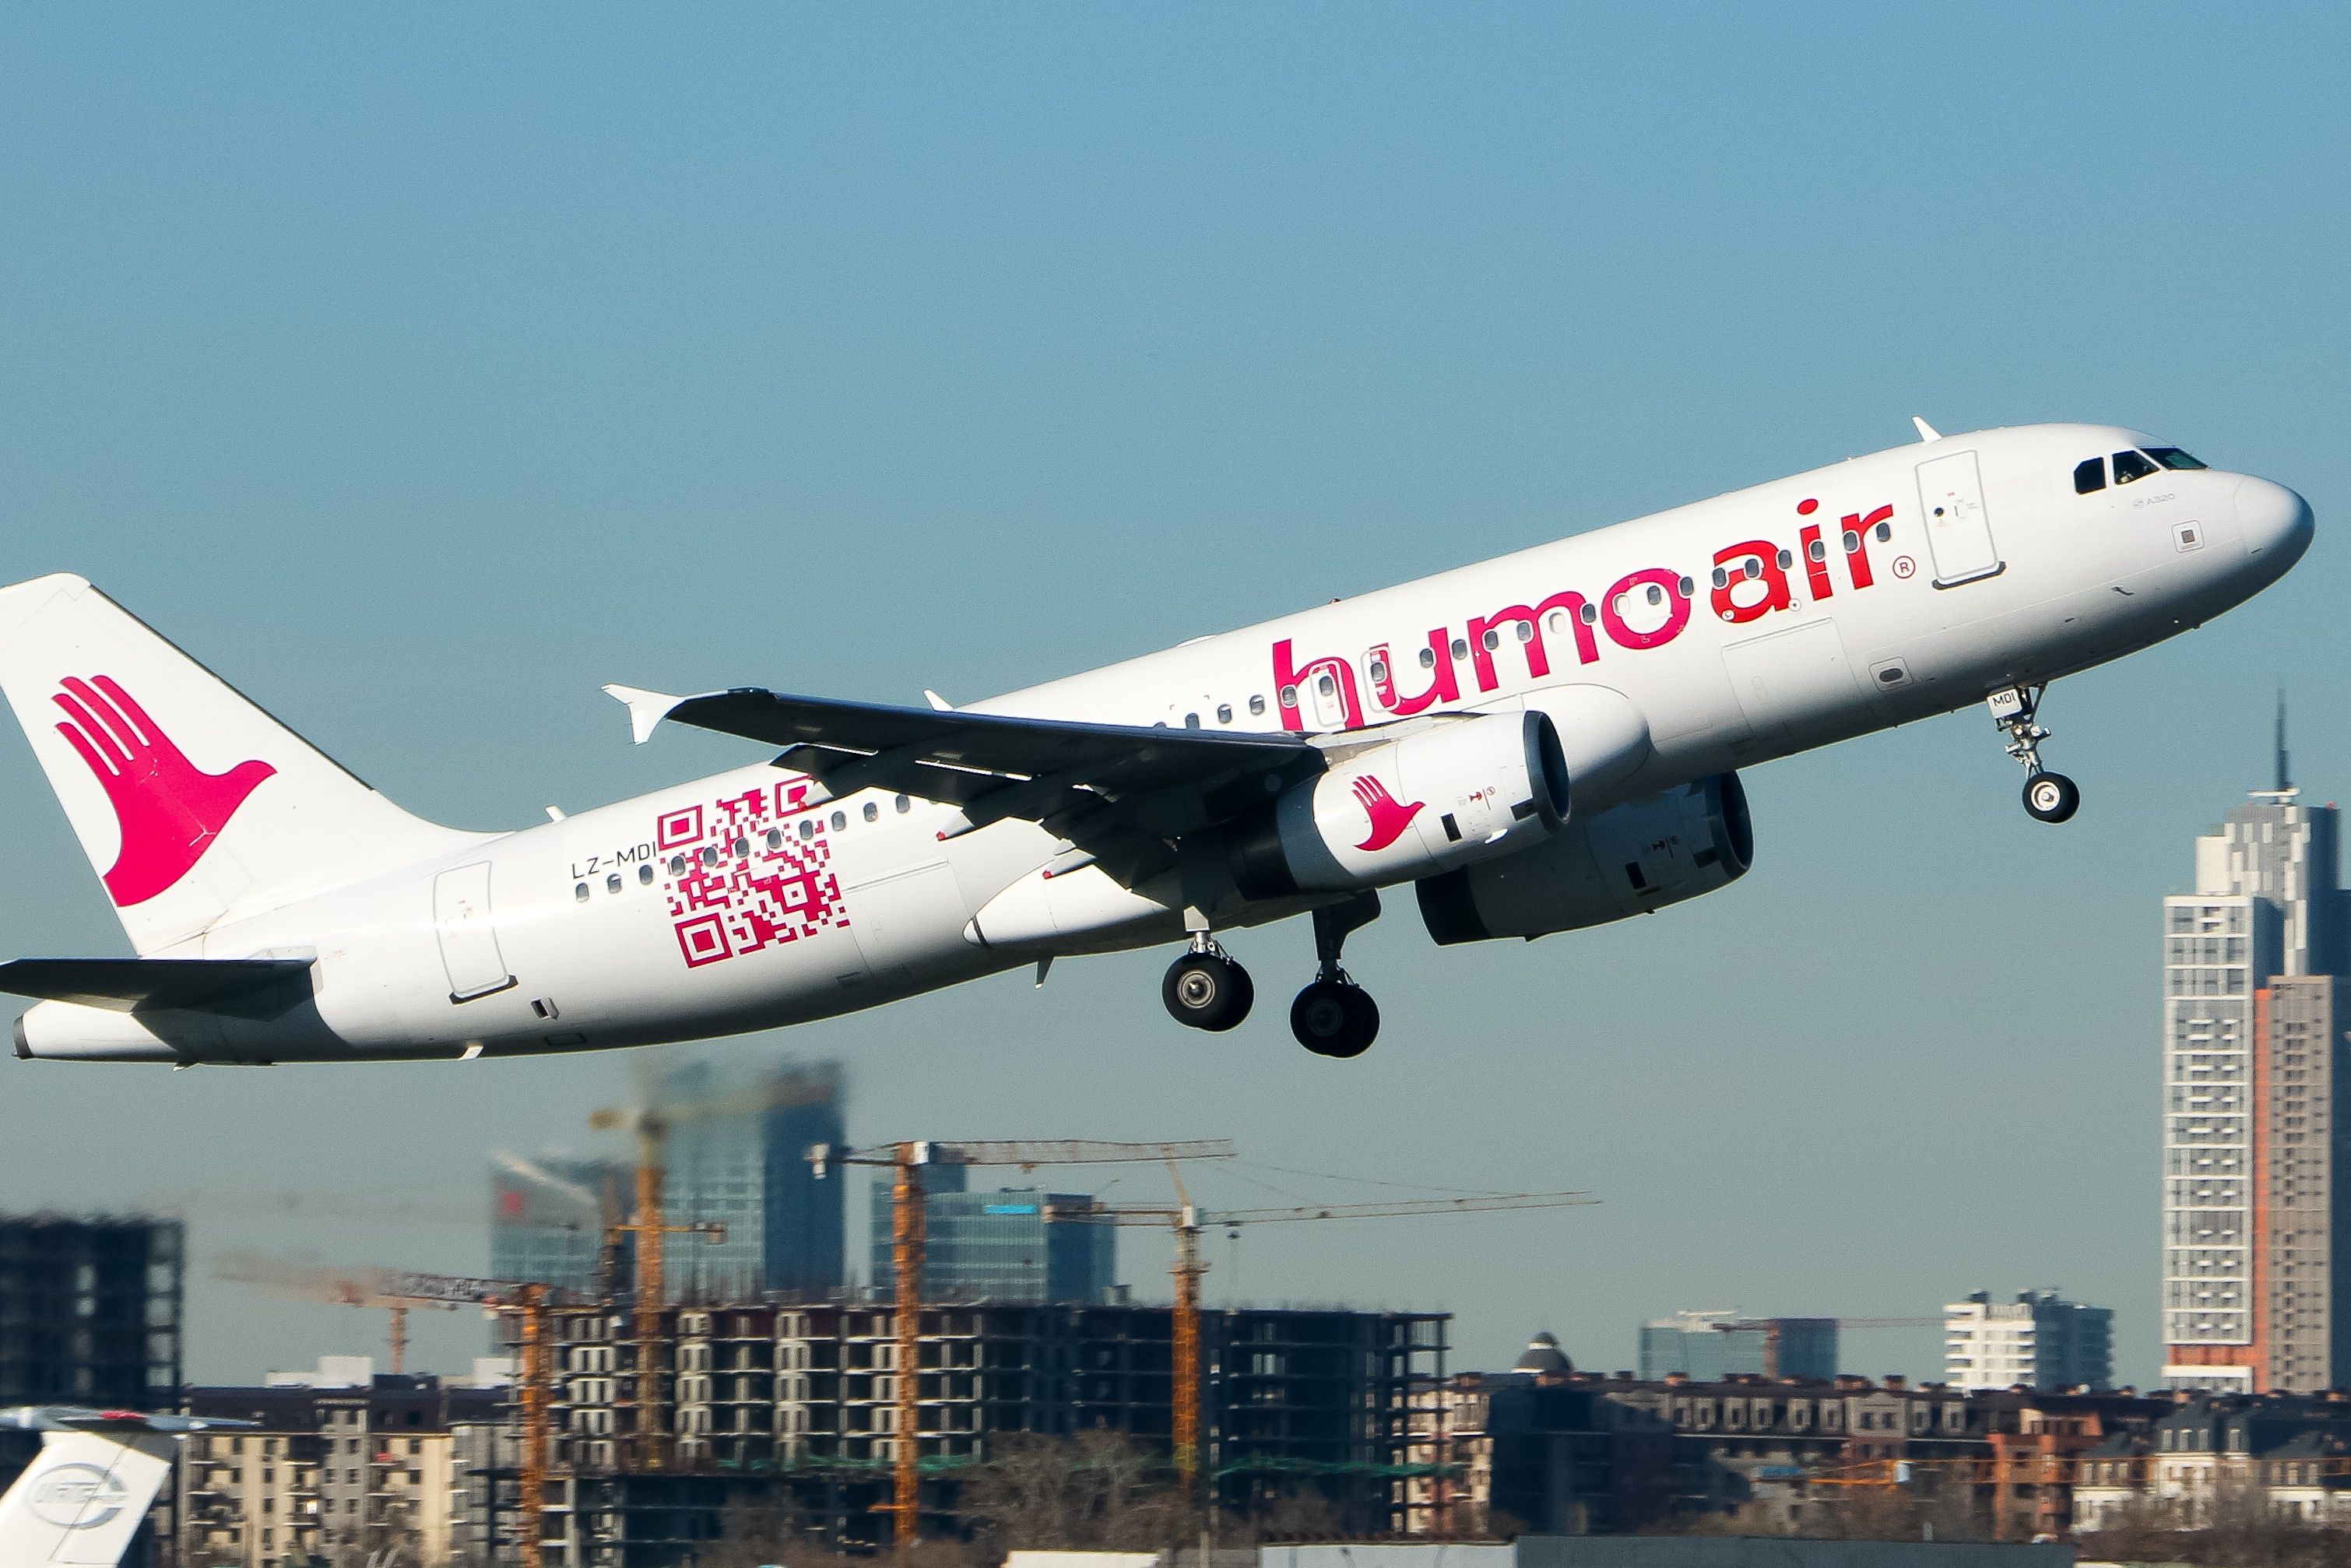 HUMO Air Airbus A320 taking off.